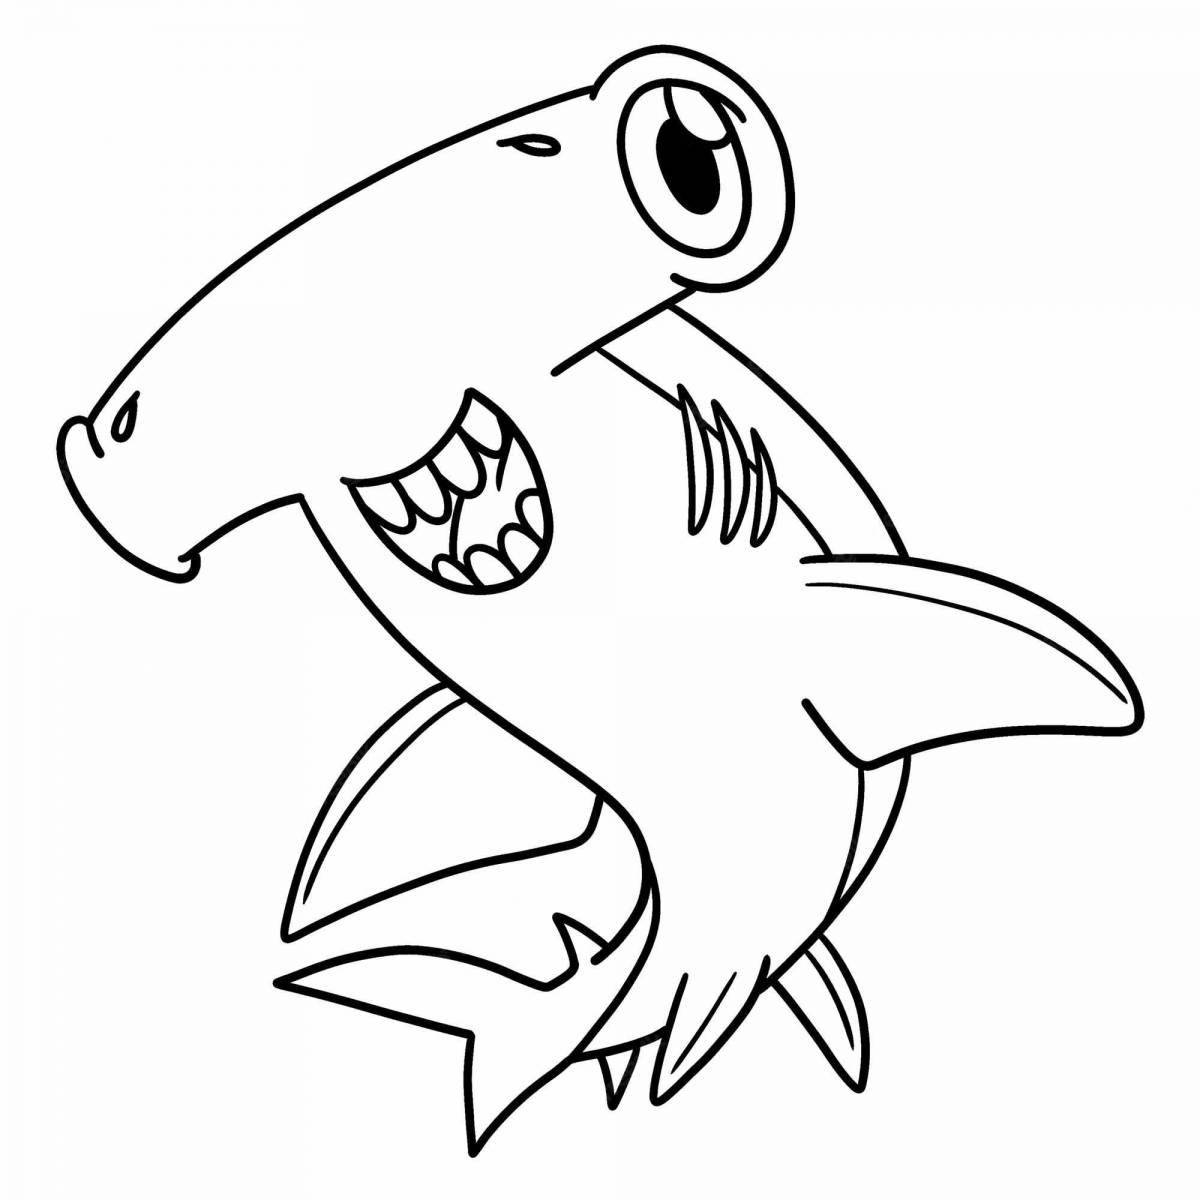 Glowing robot shark coloring page